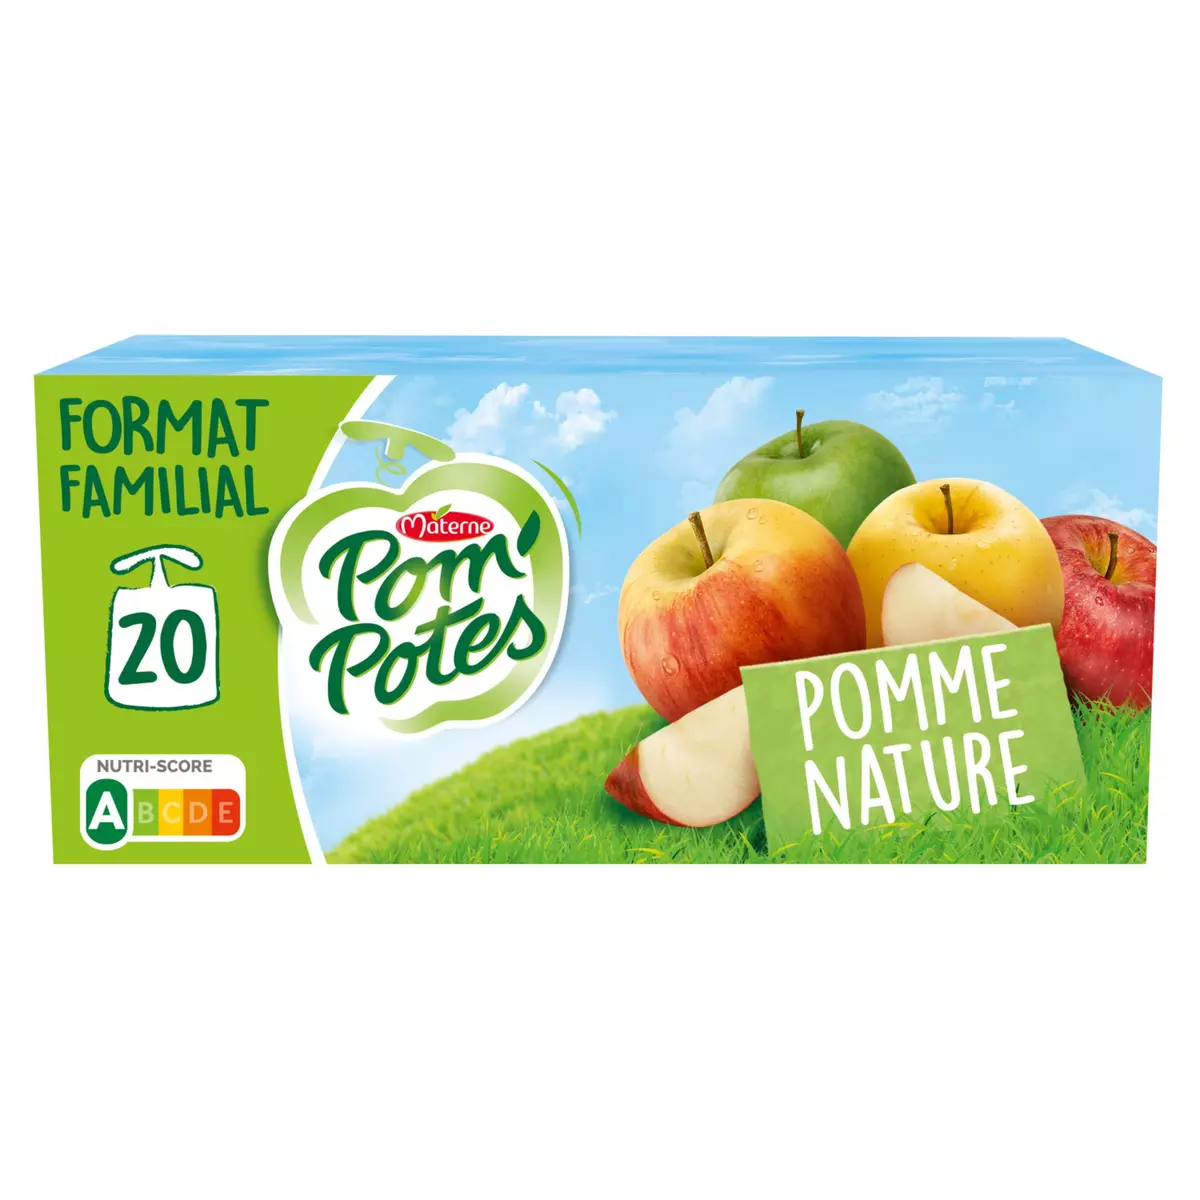 POM'POTES Gourdes compote pomme nature 20x90g